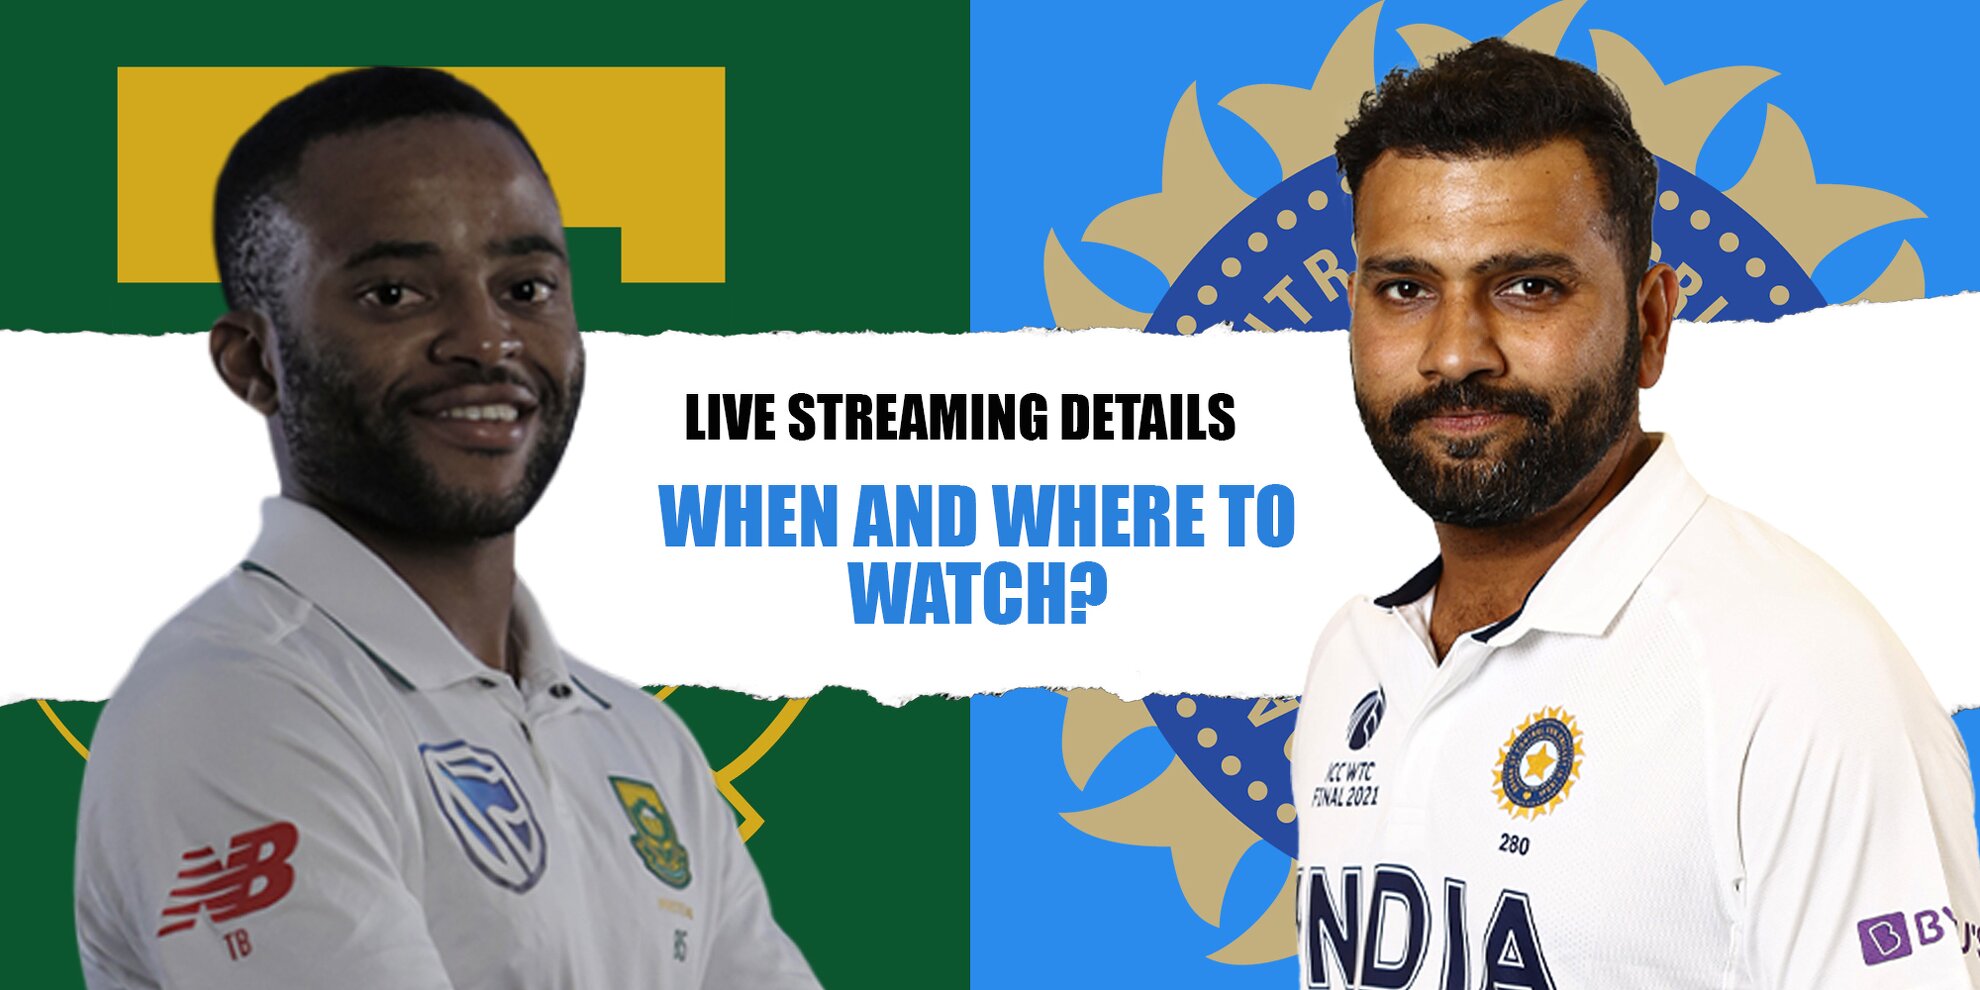 IND vs SA: Live streaming details, when and where to watch 1st Test